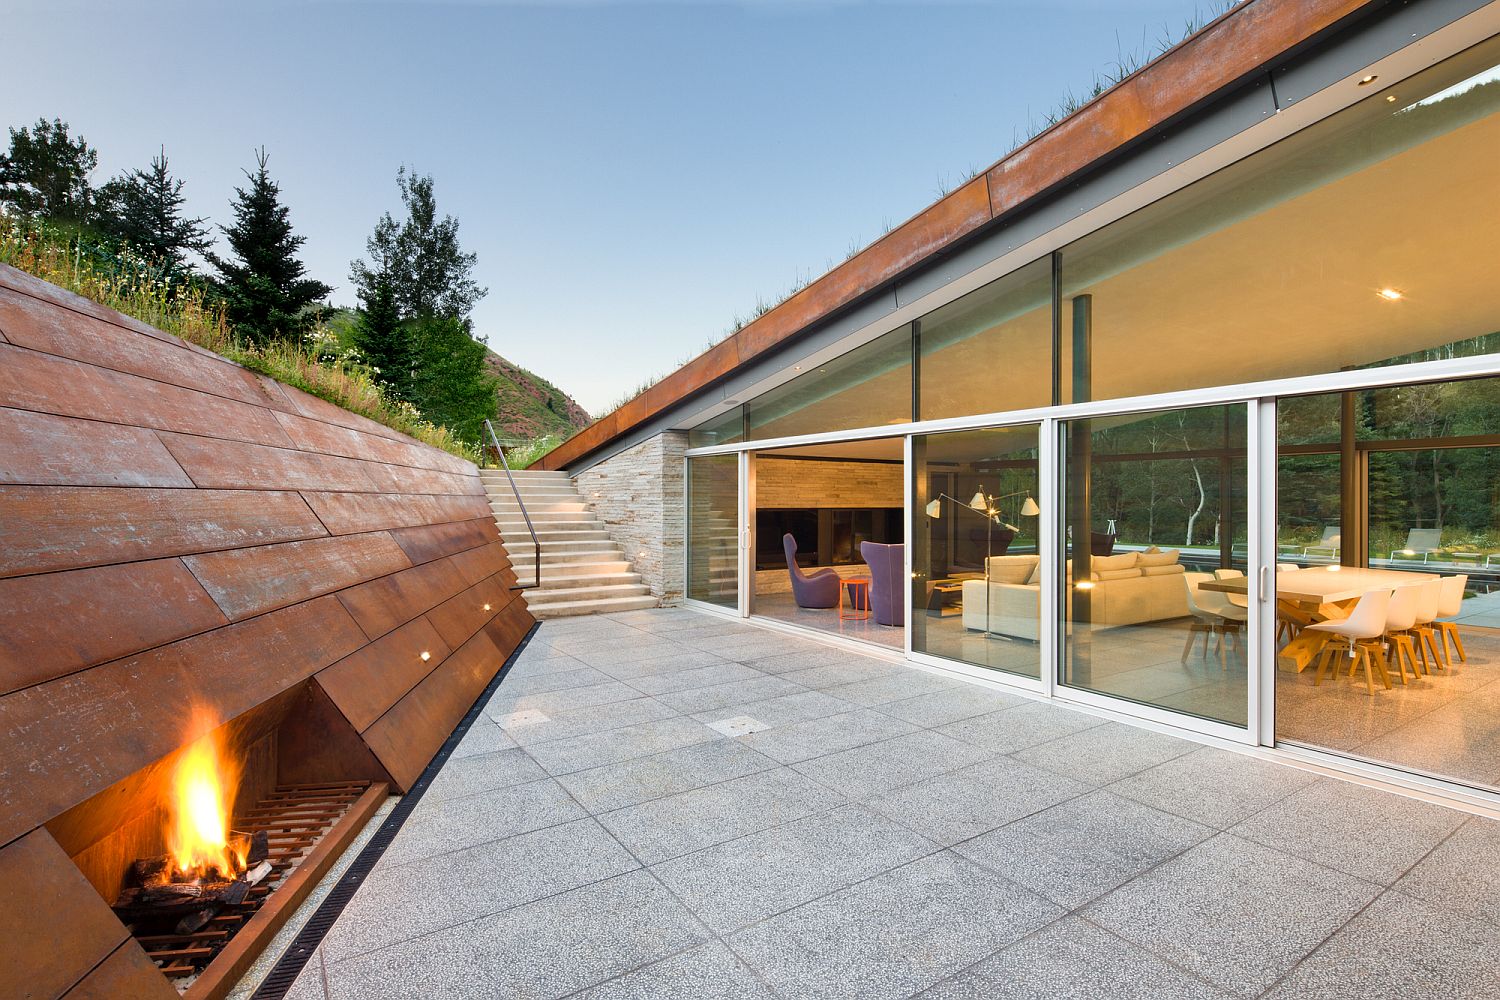 Corten-clad-wall-for-the-sunken-lounge-inside-the-mountain-home-with-green-roof